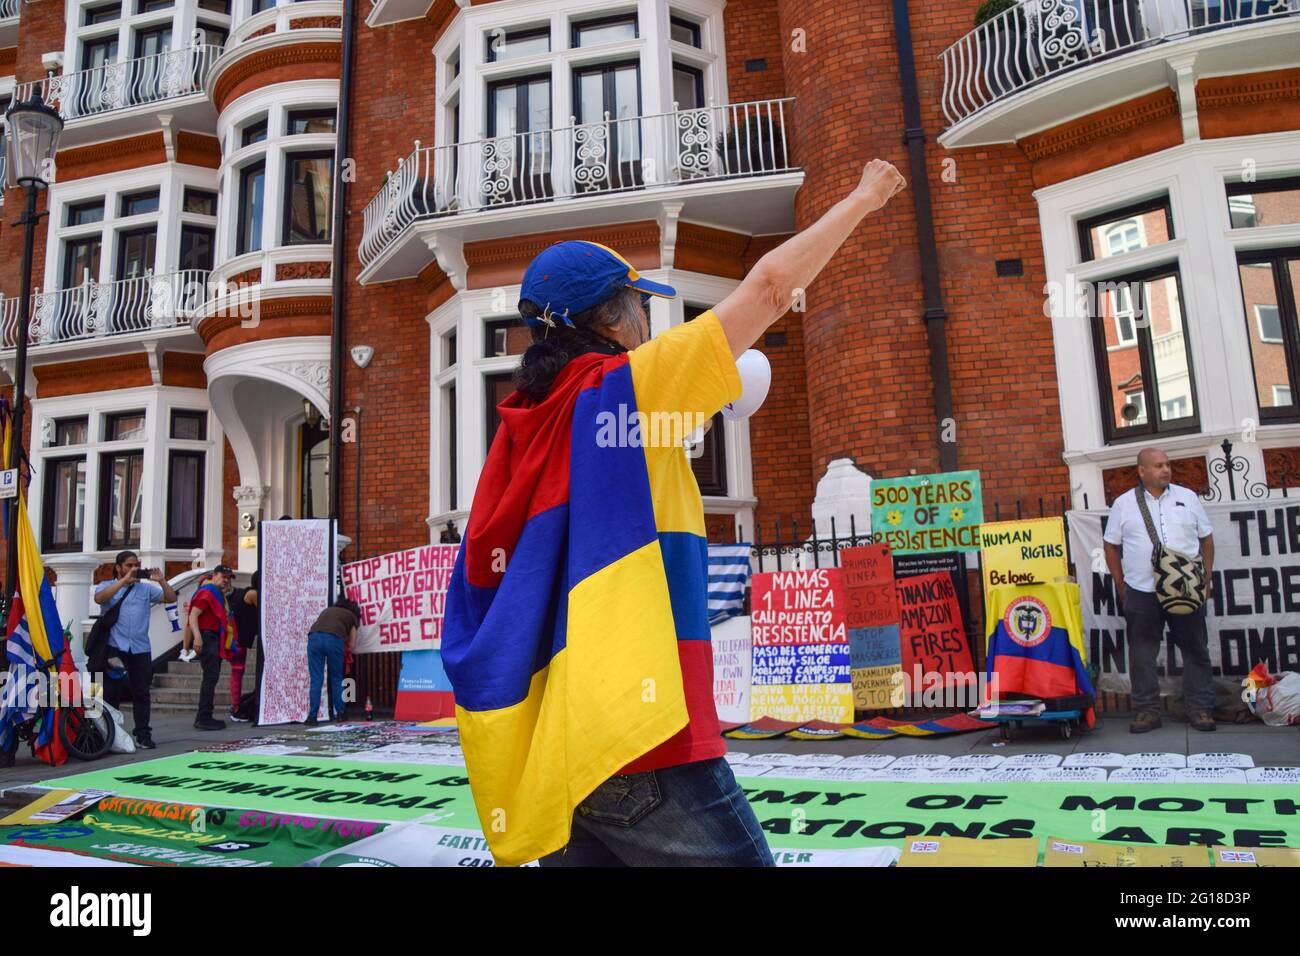 London, UK. 05th June, 2021. A protester with a megaphone gestures outside the Colombian Embassy in London during the demonstration.A demonstration was held outside the embassy in Knightsbridge as part of the ongoing protests against the current Colombian government. Credit: SOPA Images Limited/Alamy Live News Stock Photo